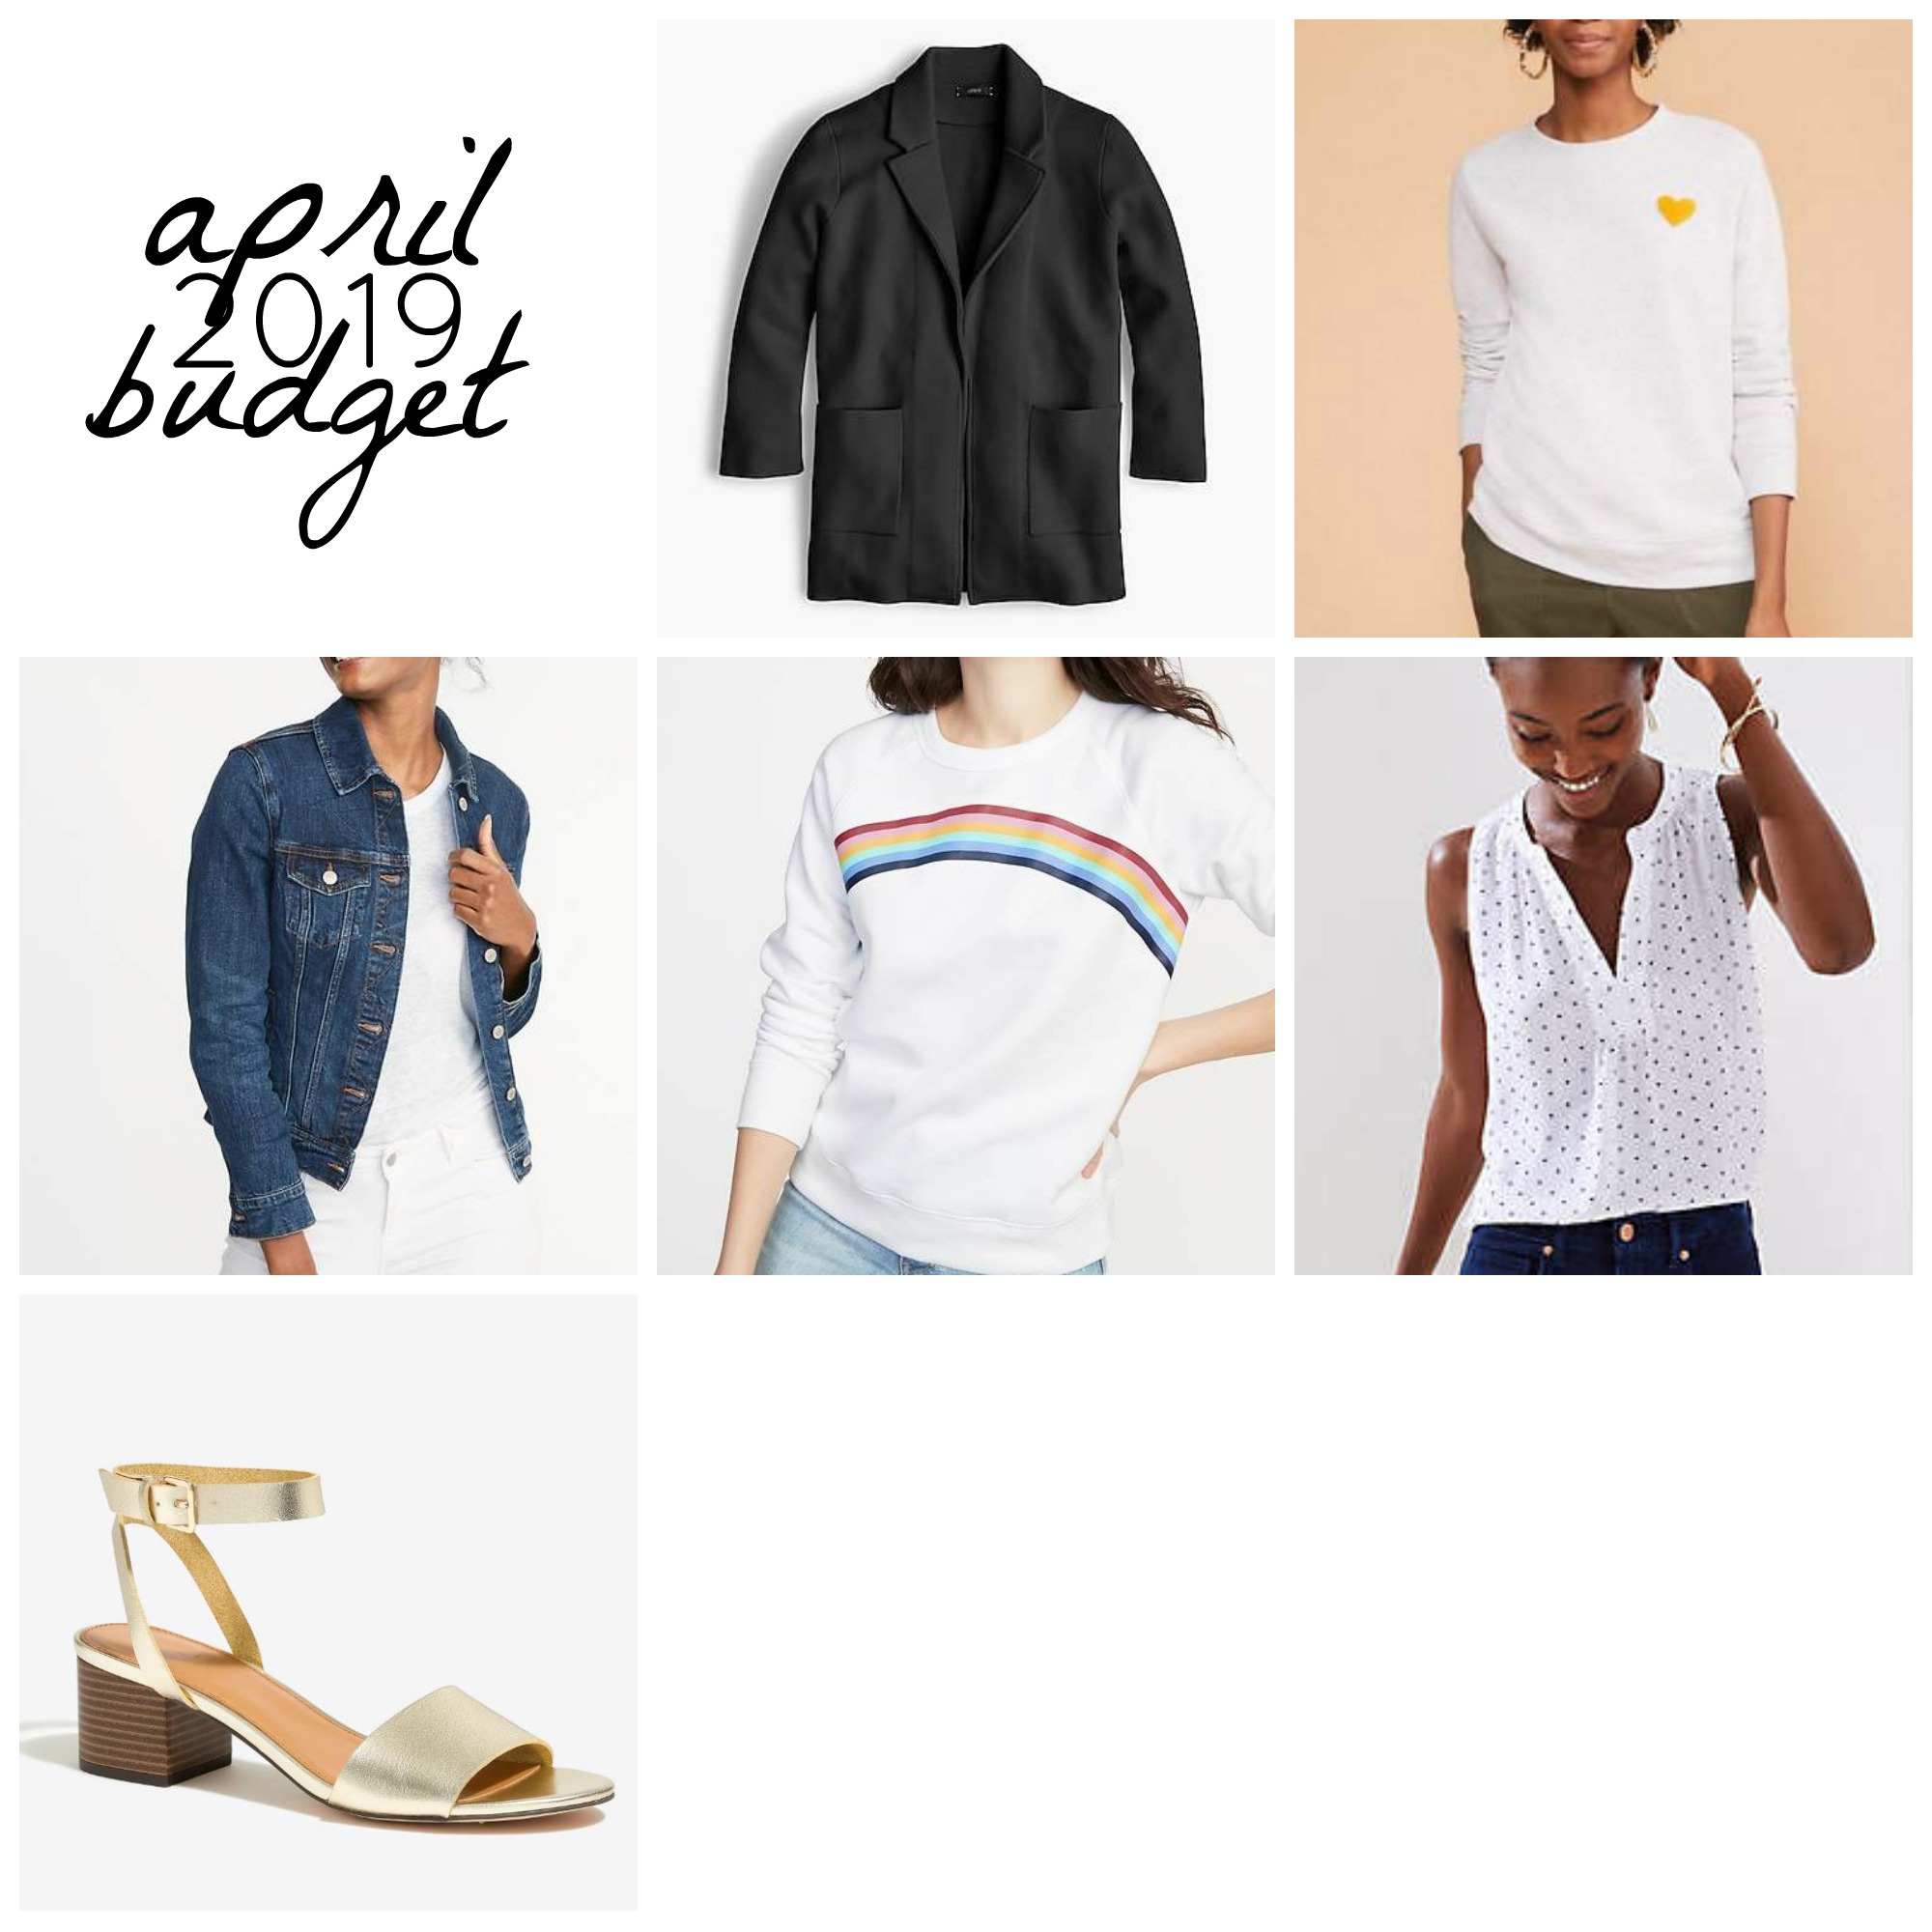 April 2019 Budget | Something Good | A DC Style and Lifestyle Blog on a Budget